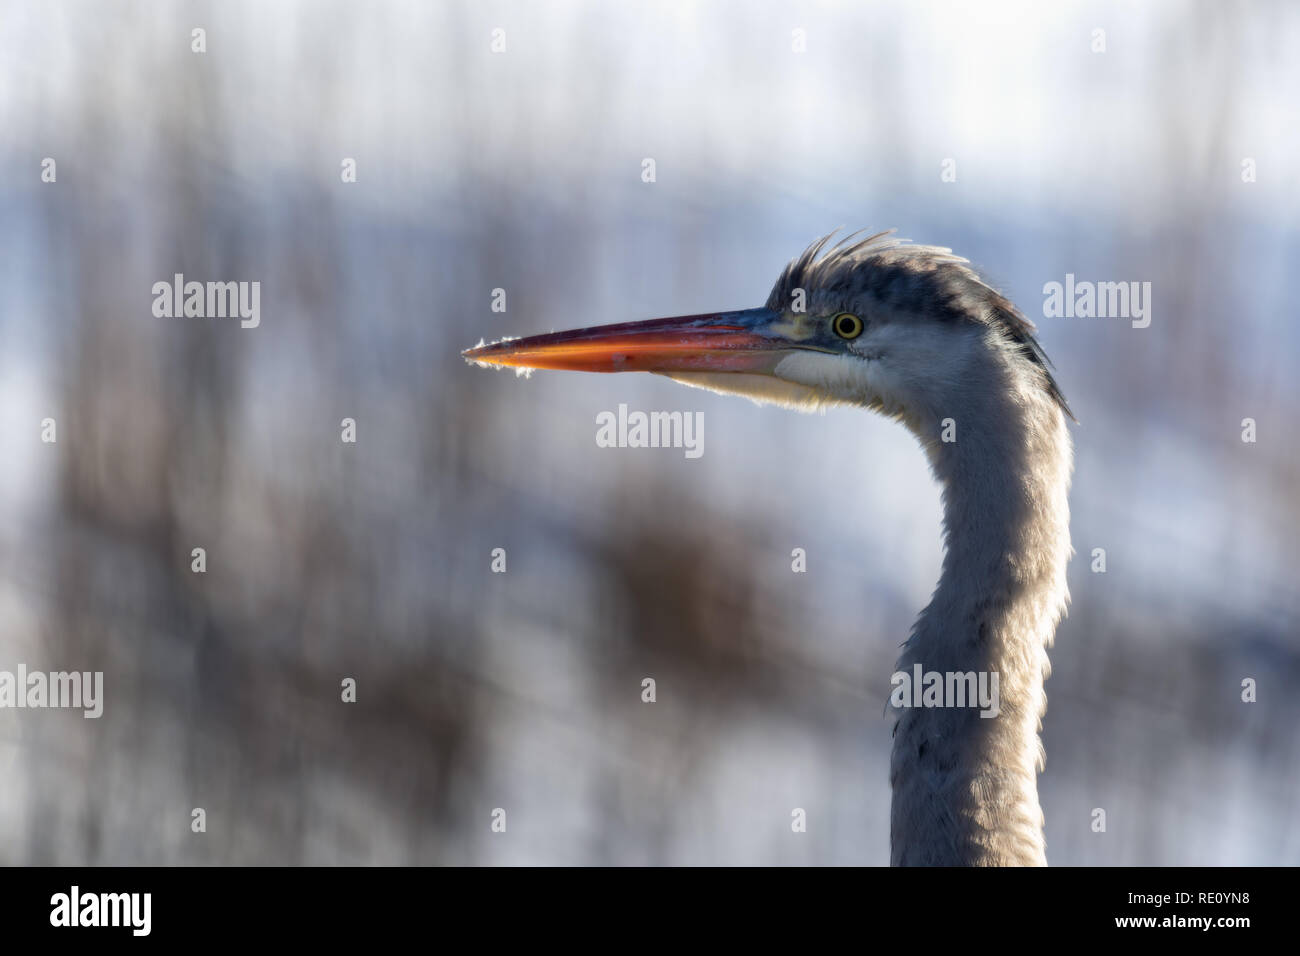 close-up portrait of young grey heron Stock Photo